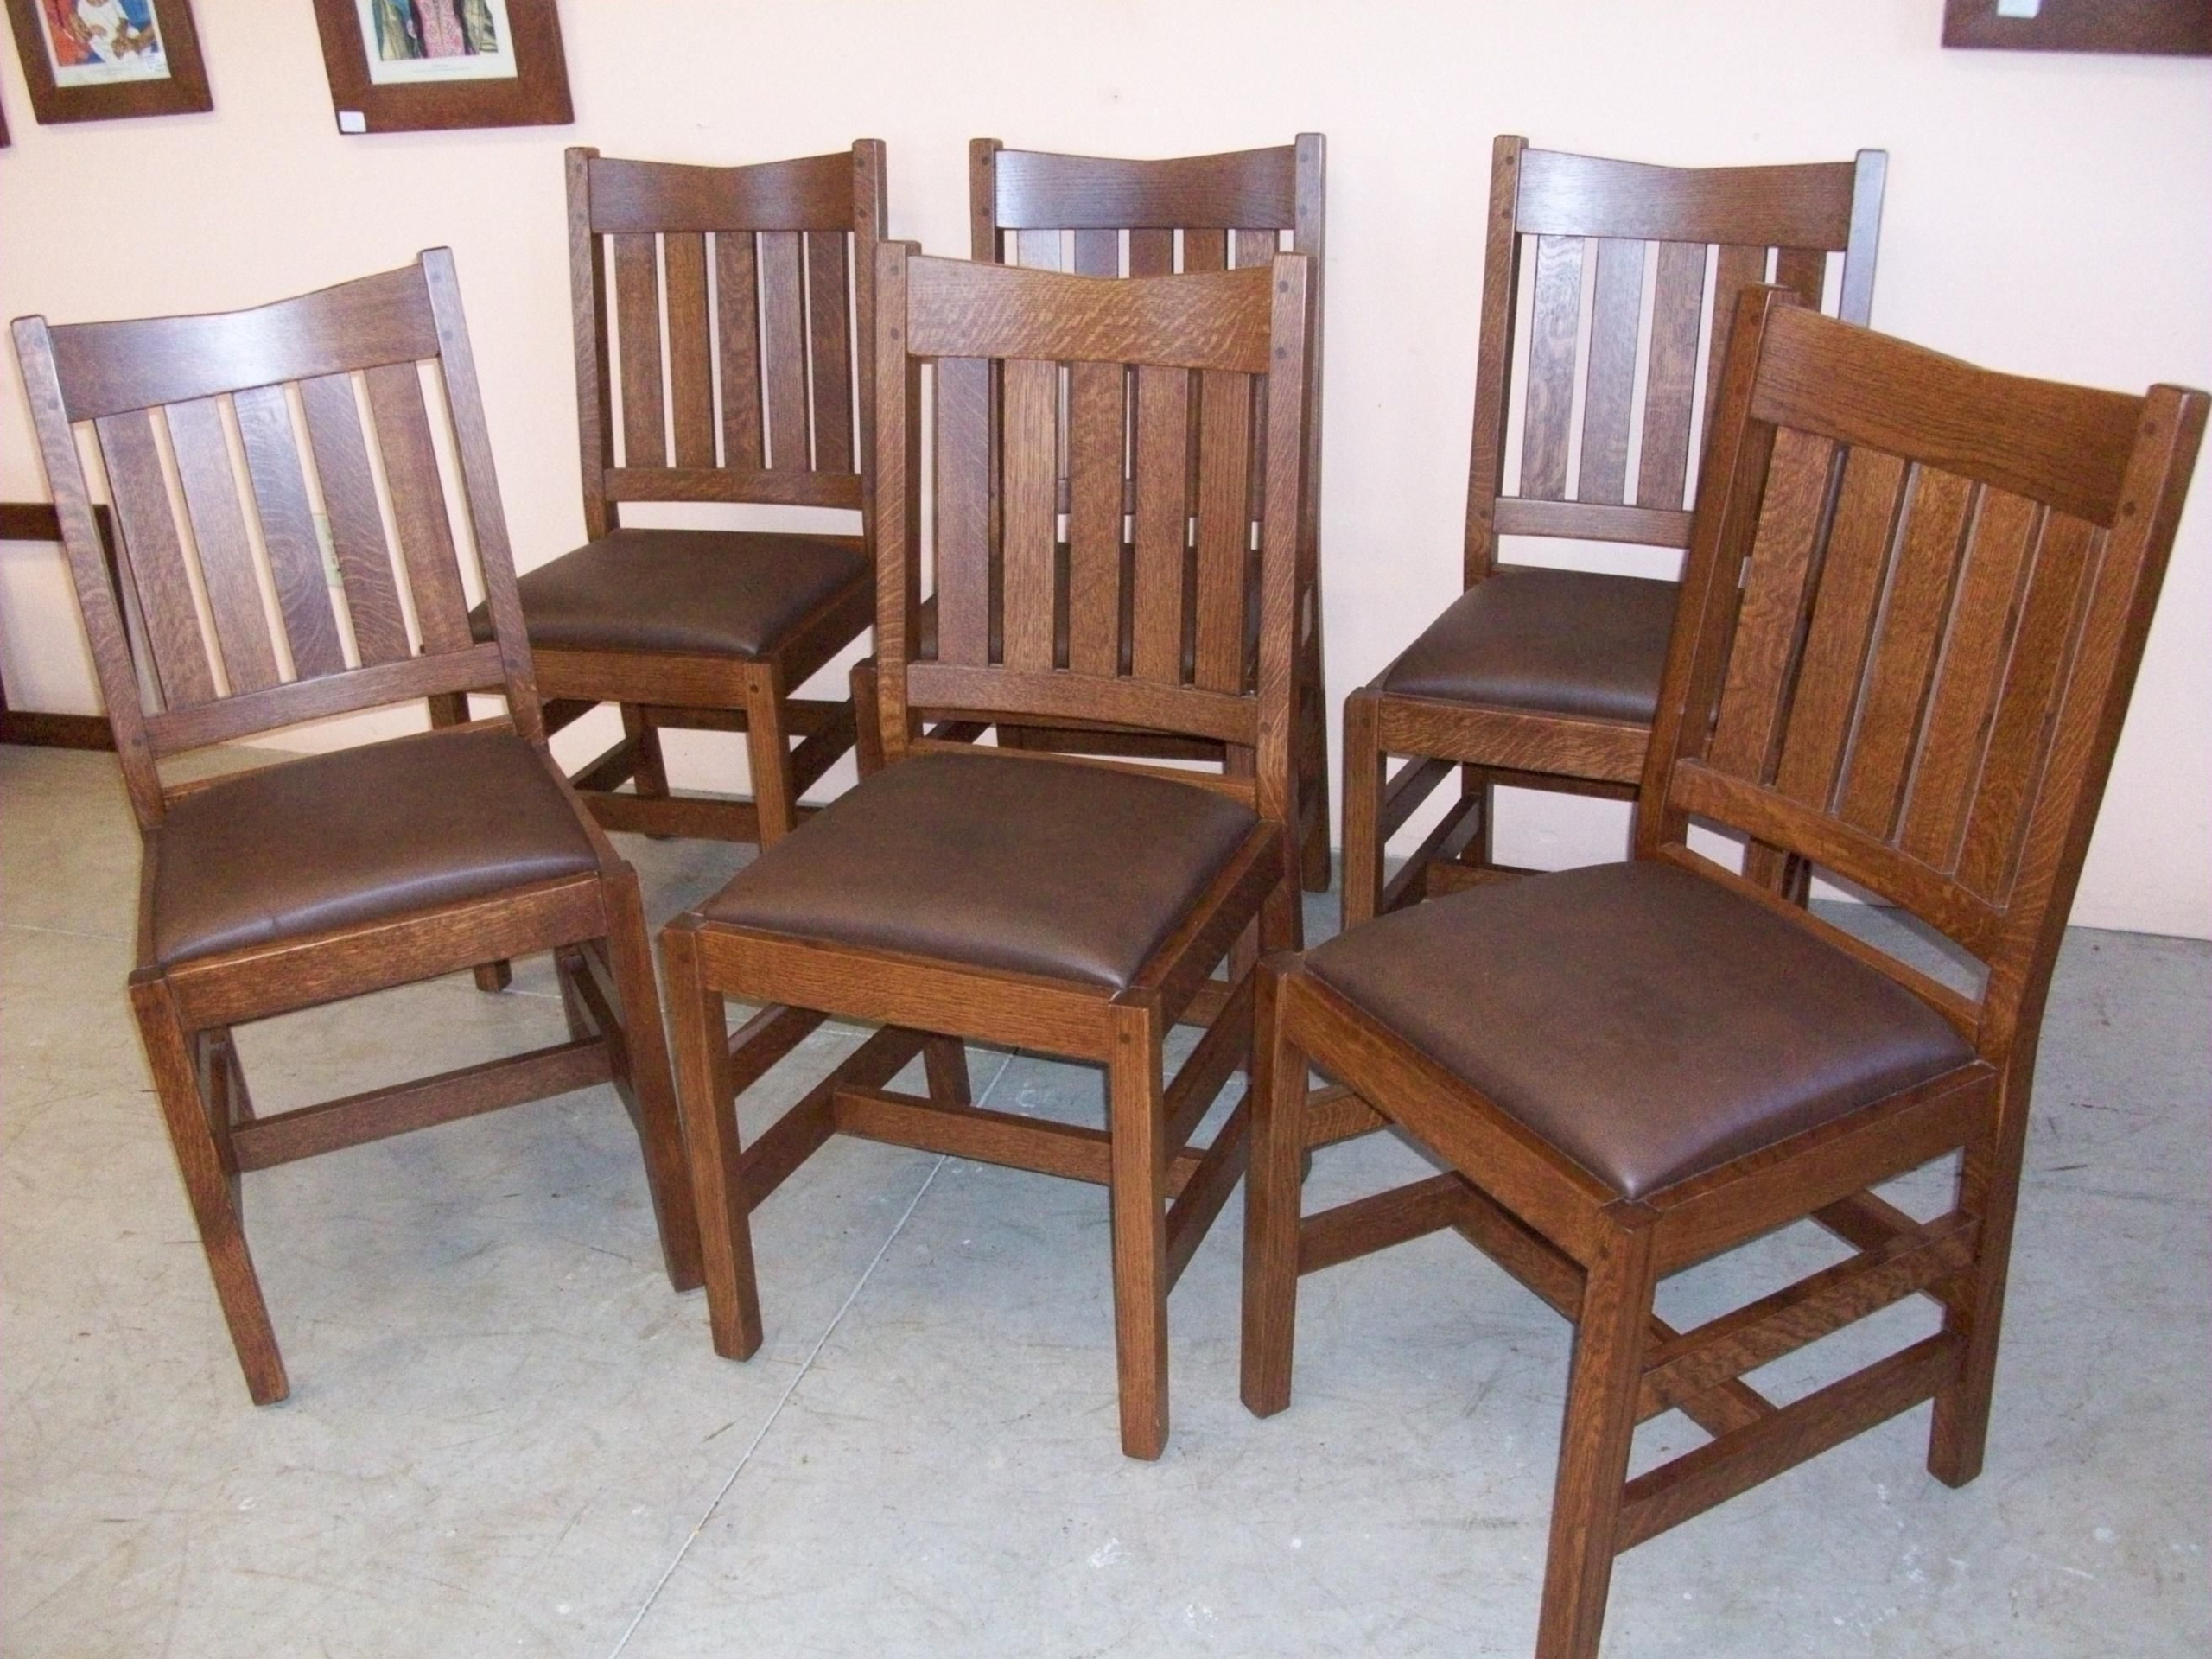 Mission Oak Dining Room Chair - Ideas on Foter